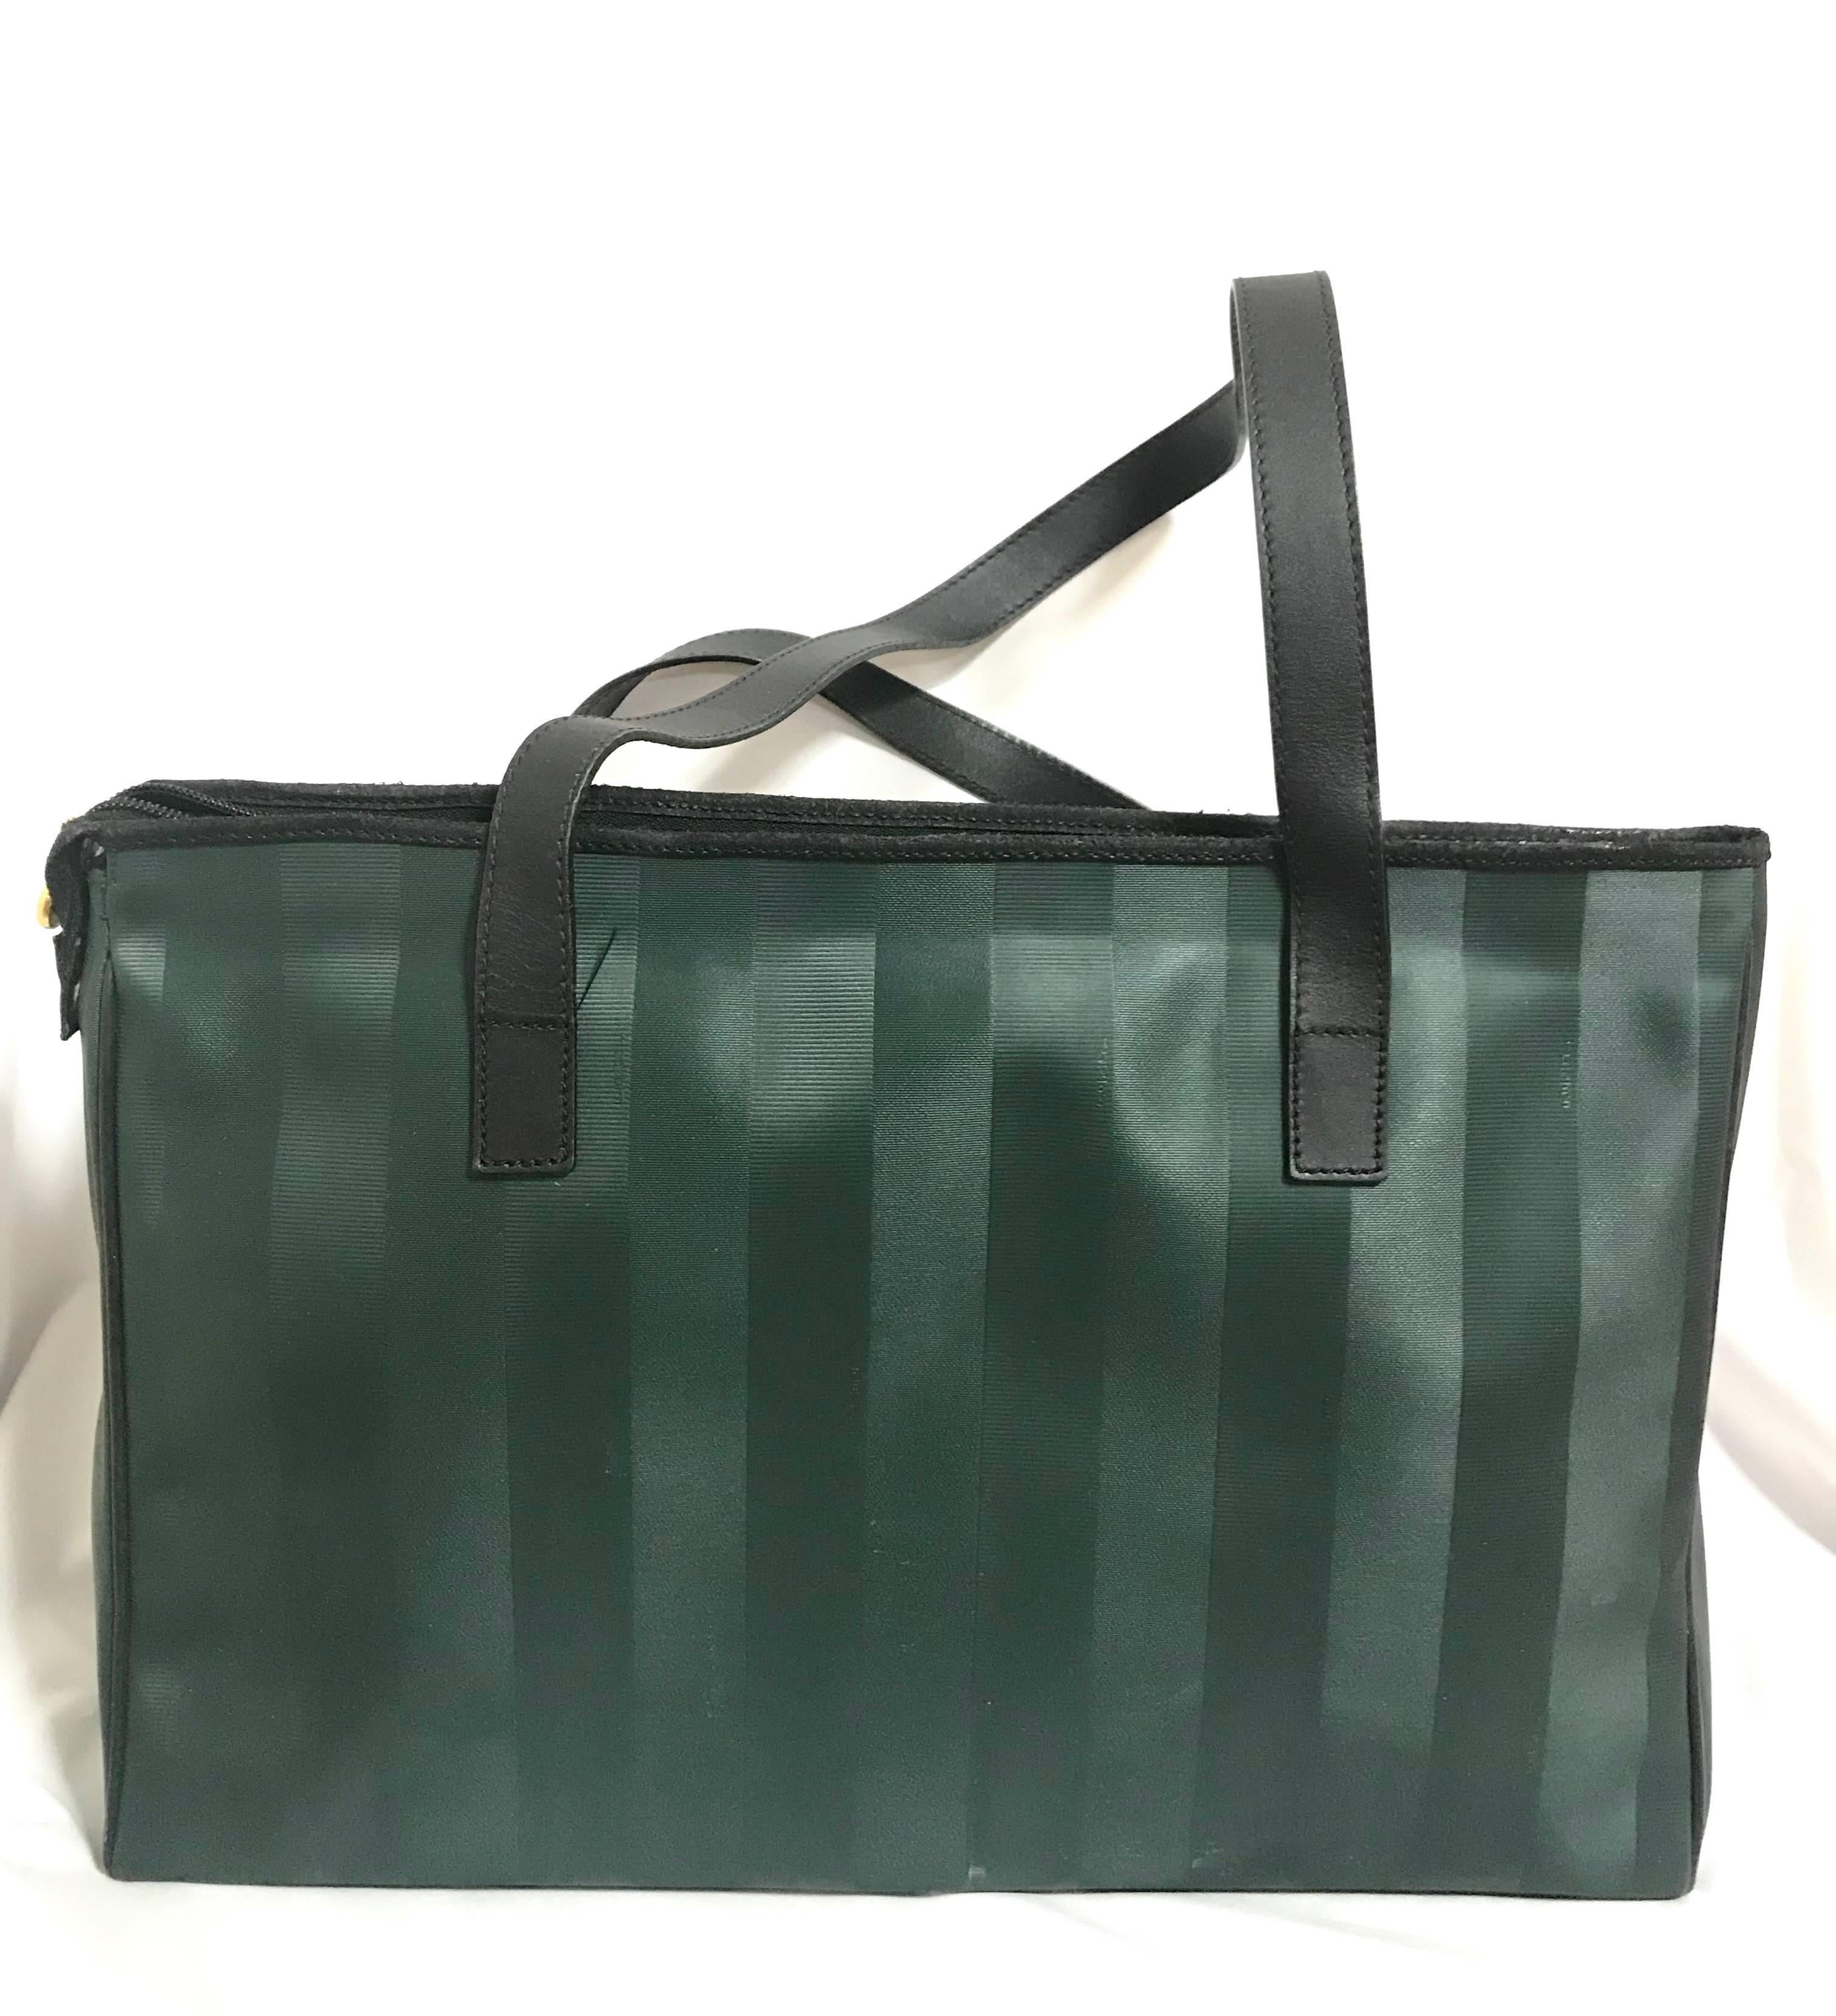 1990s. Vintage FENDI classic deep green pecan stripe pattern large shopper tote bag with black leather handles. Daily use purse for Unisex.

For all Fendi vintage lovers, this purse is the one for you!

Very chic and cute shopper tote from FENDI